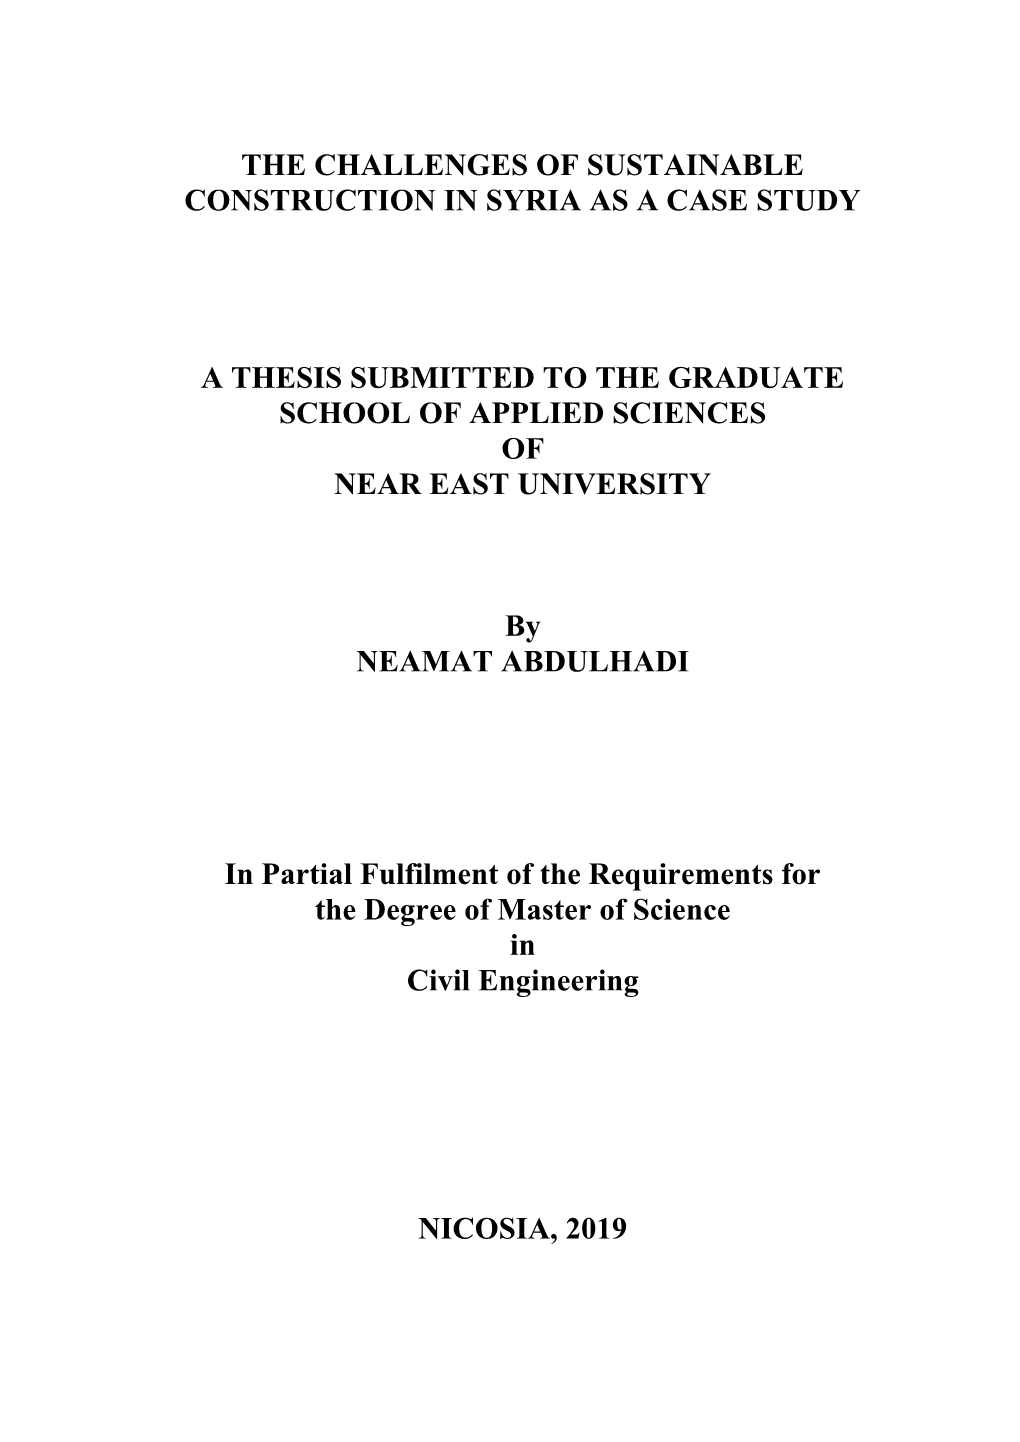 The Challenges of Sustainable Construction in Syria As a Case Study a Thesis Submitted to the Graduate School of Applied Science